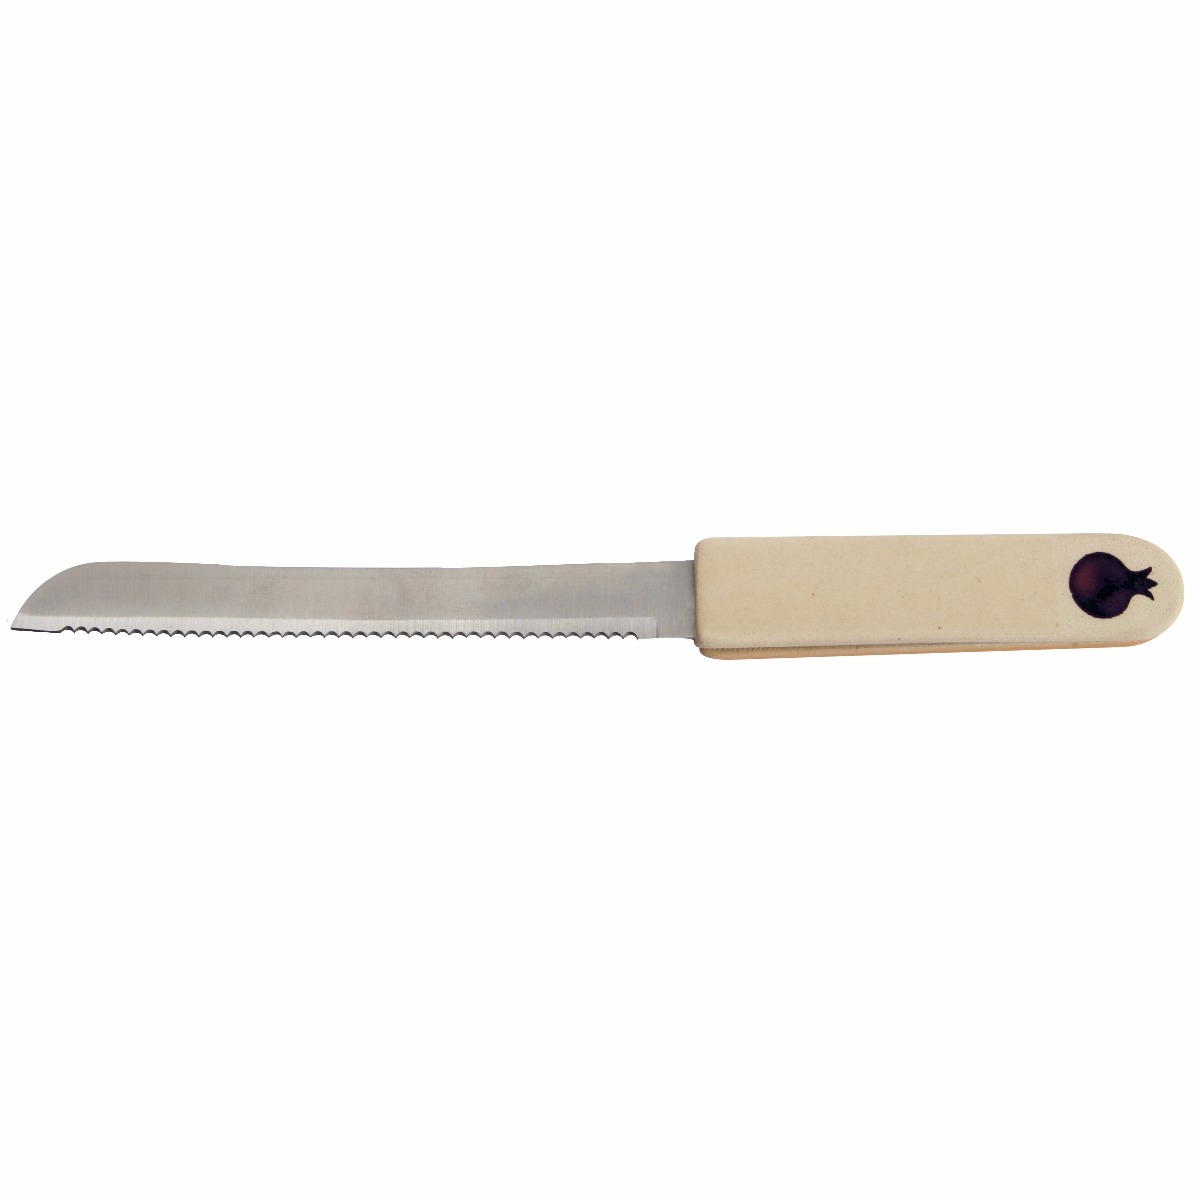 Ceramic and Stainless Steel Challah Knife with White Handle and Pomegranate - 1